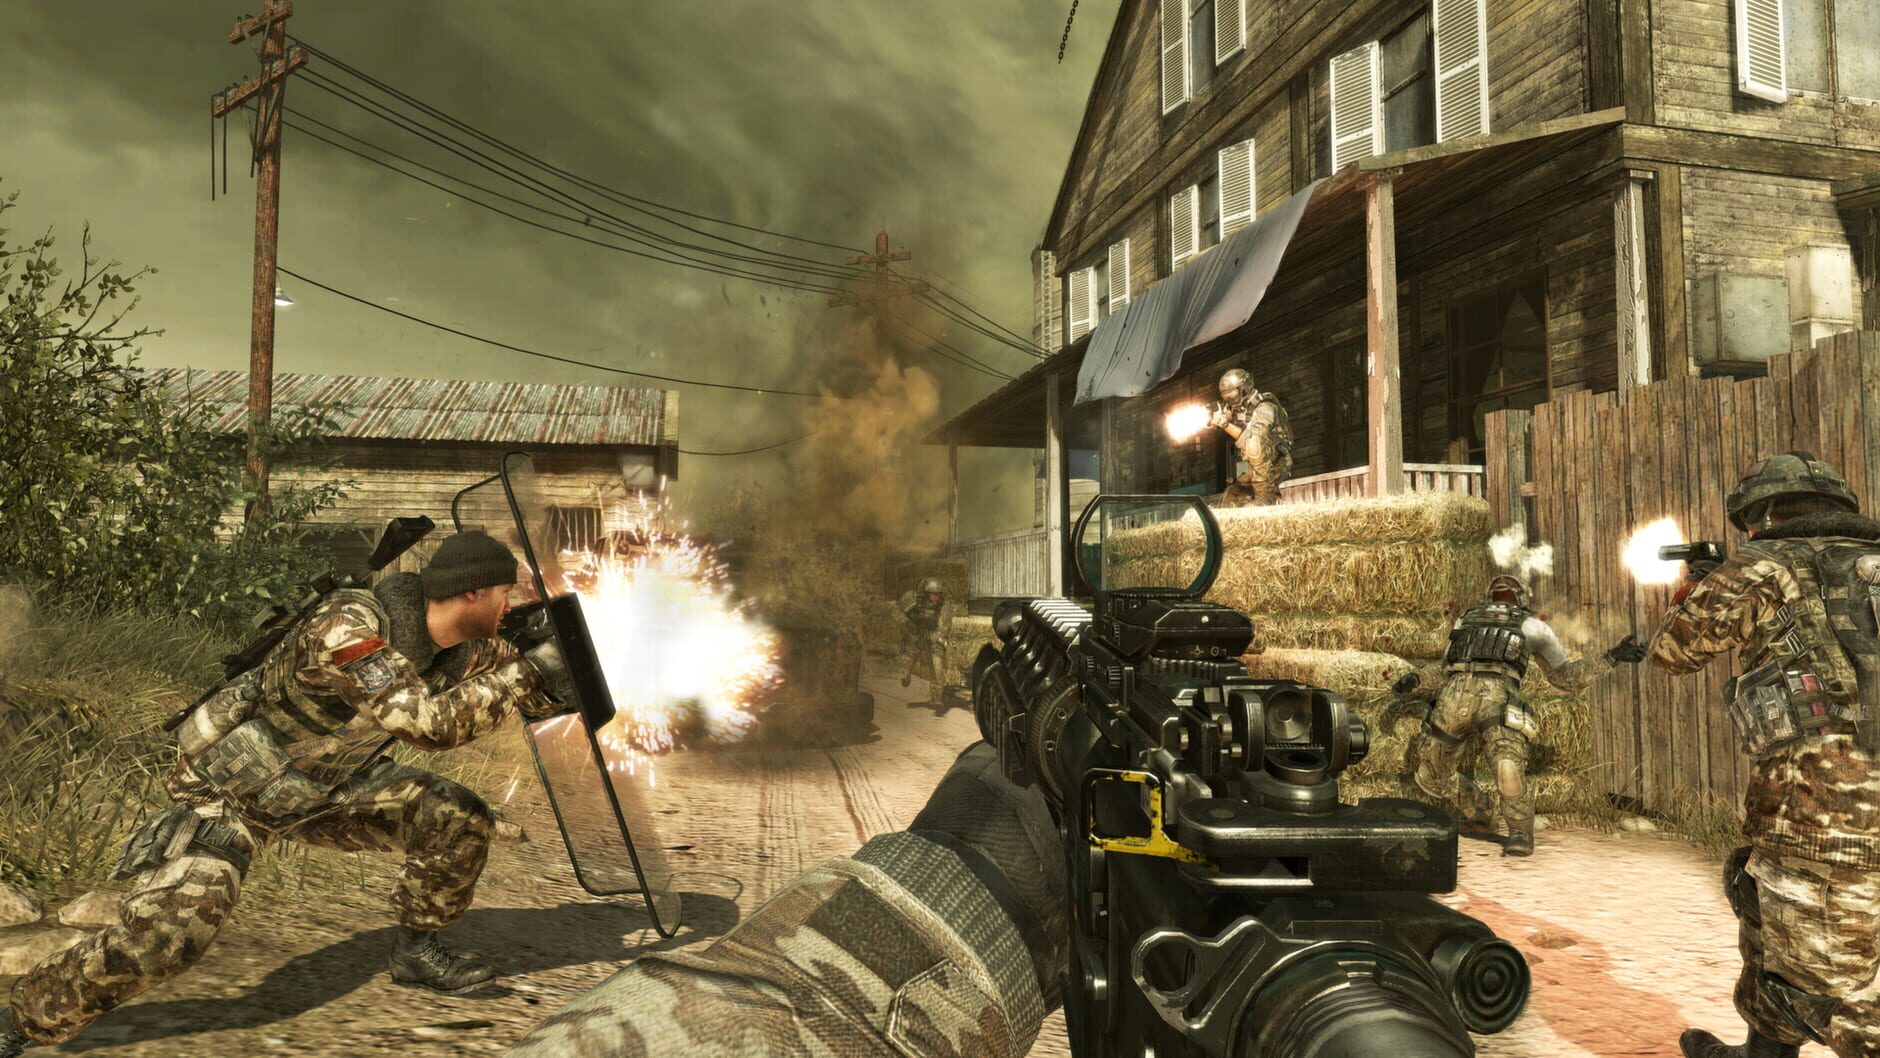 Screenshot for Call of Duty: Modern Warfare 3 - Collection 3: Chaos Pack